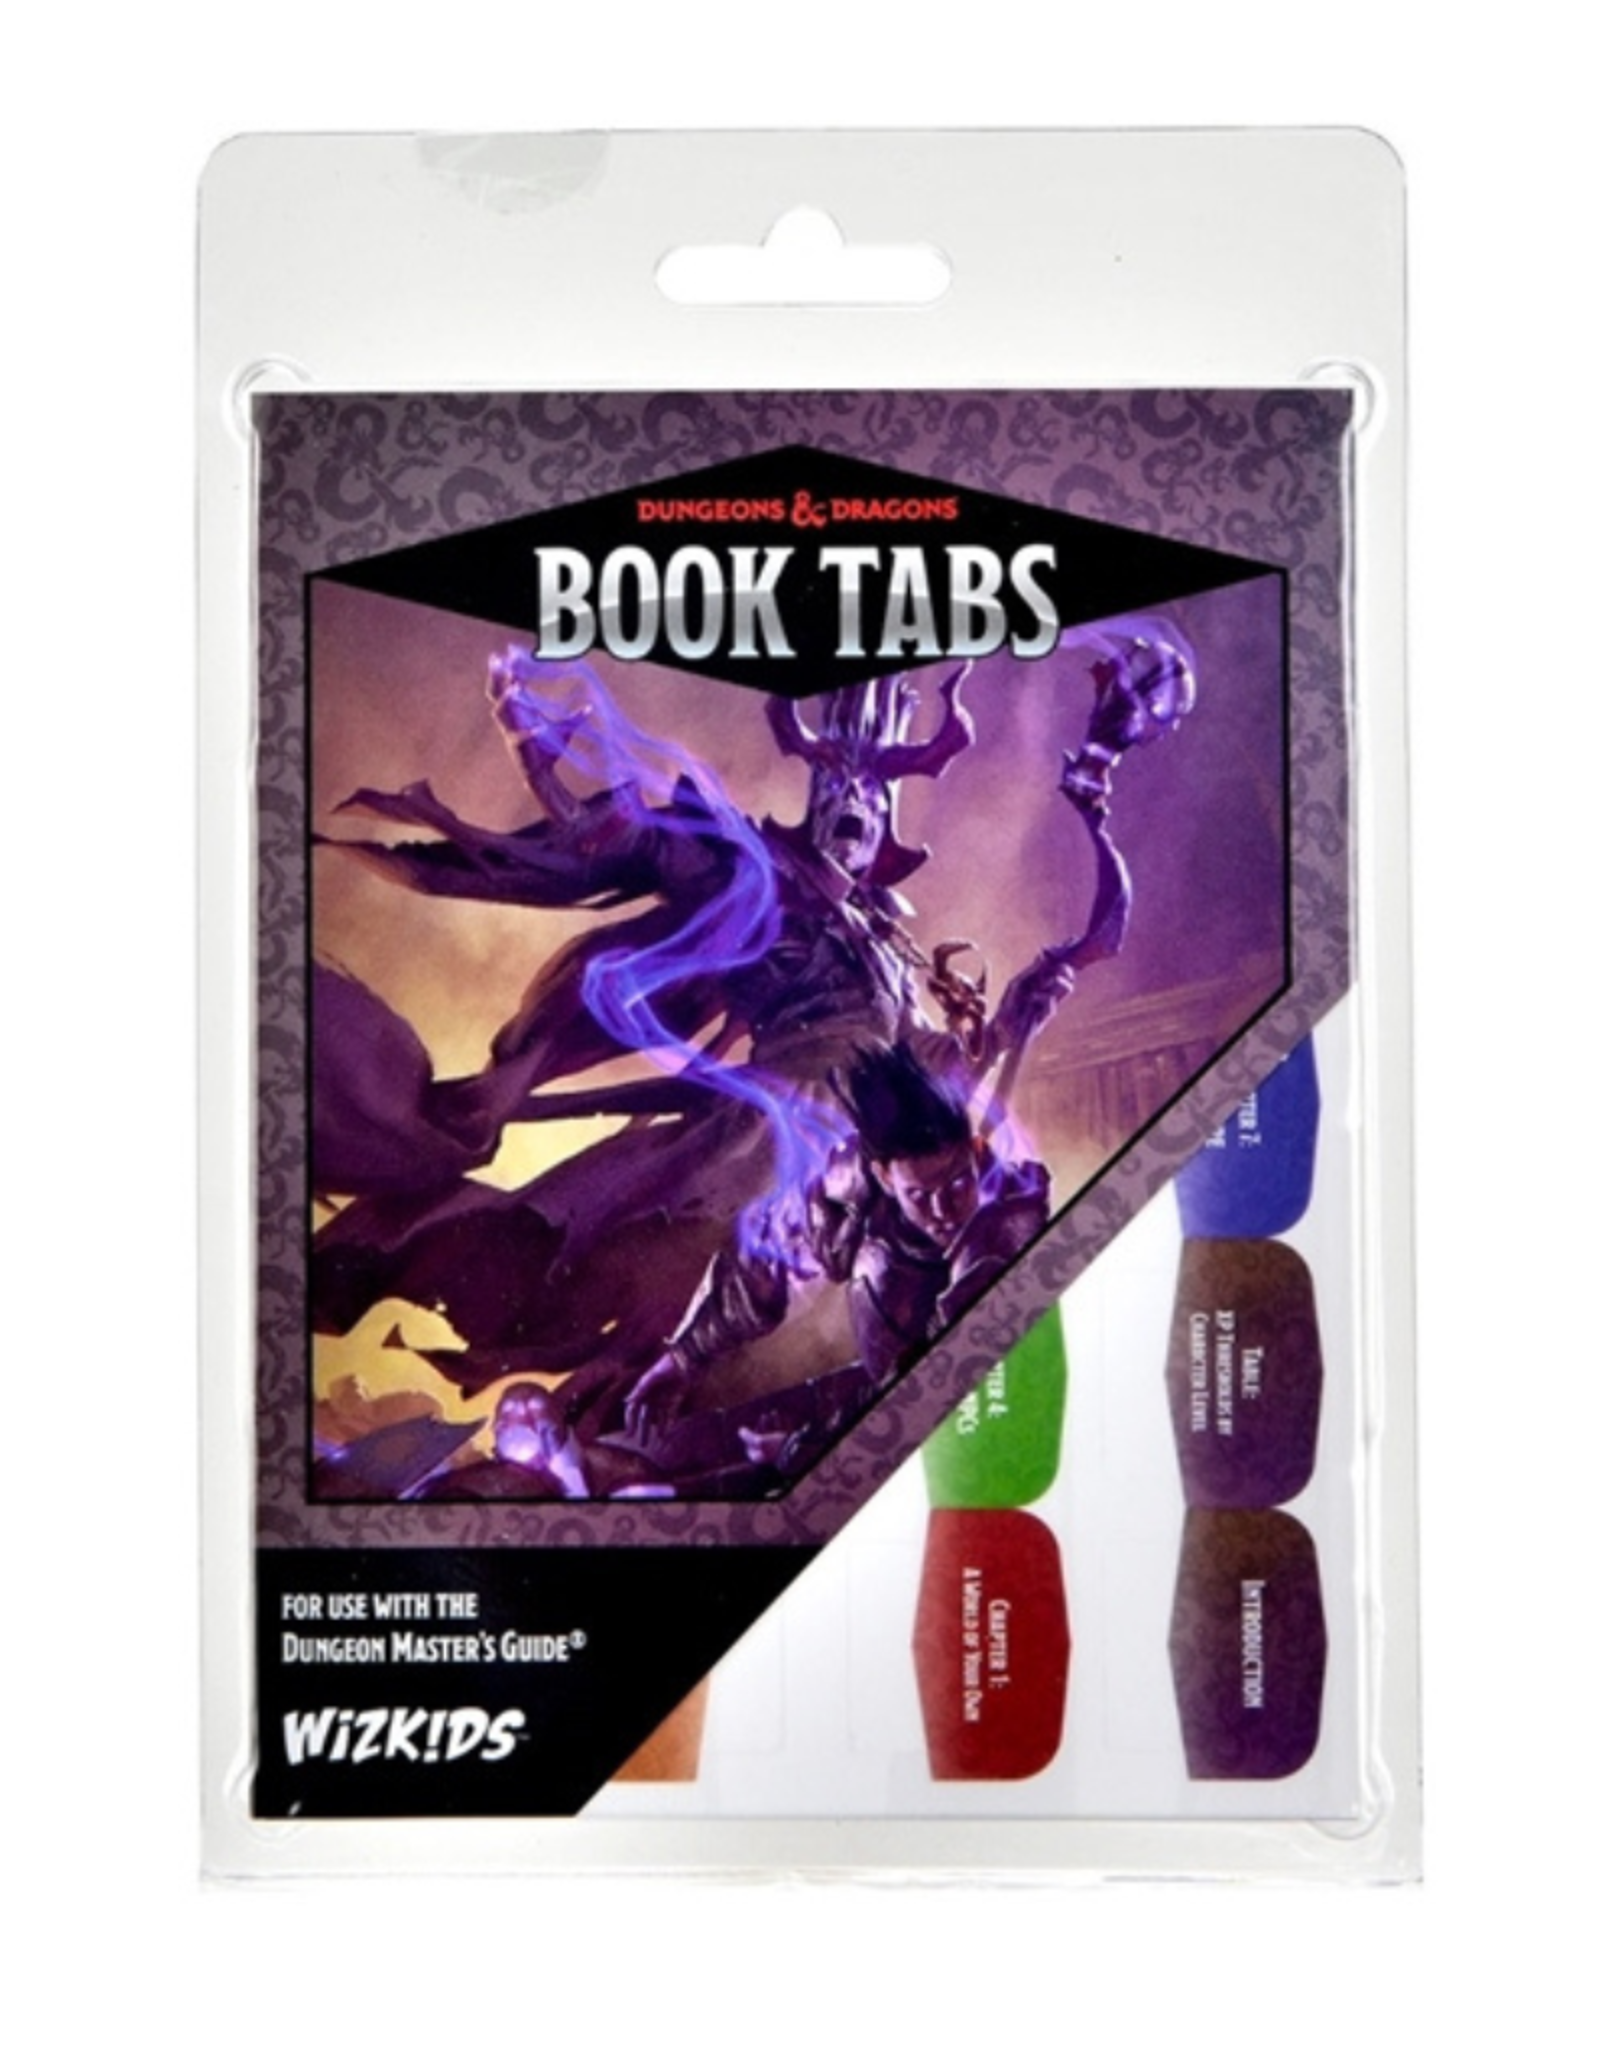 Wizards of the Coast Dungeons & Dragons: Book Tabs for the Dungeon Master's Guide